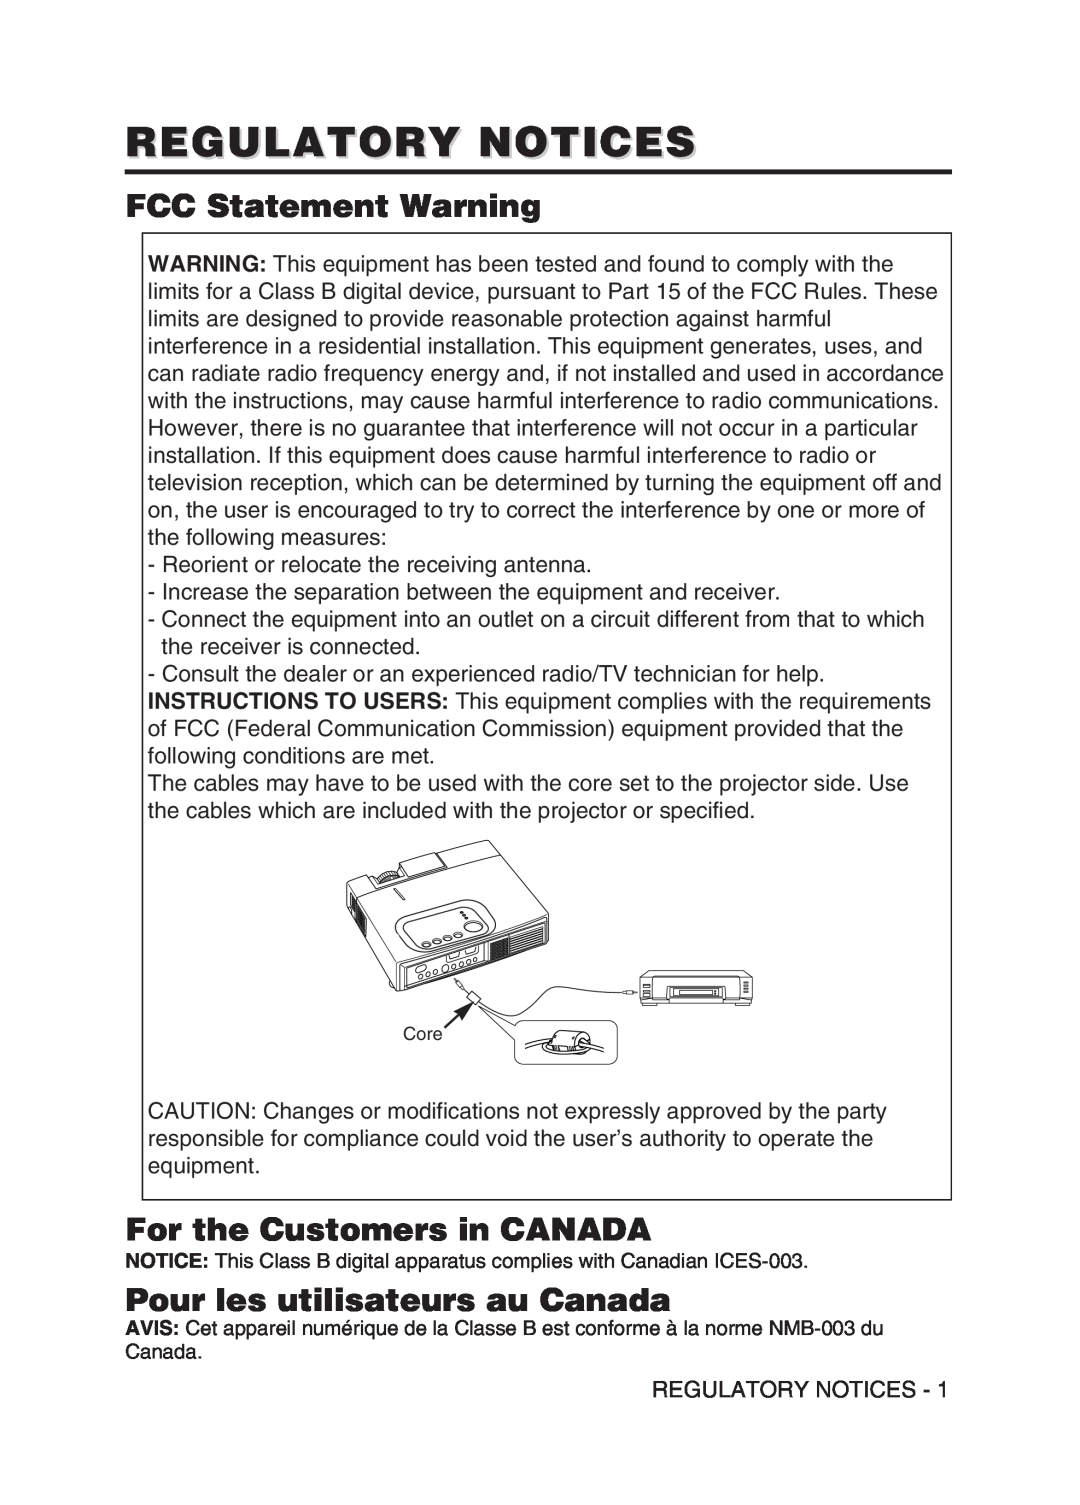 Hitachi CPS225W Regulatory Notices, FCC Statement Warning, For the Customers in CANADA, Pour les utilisateurs au Canada 